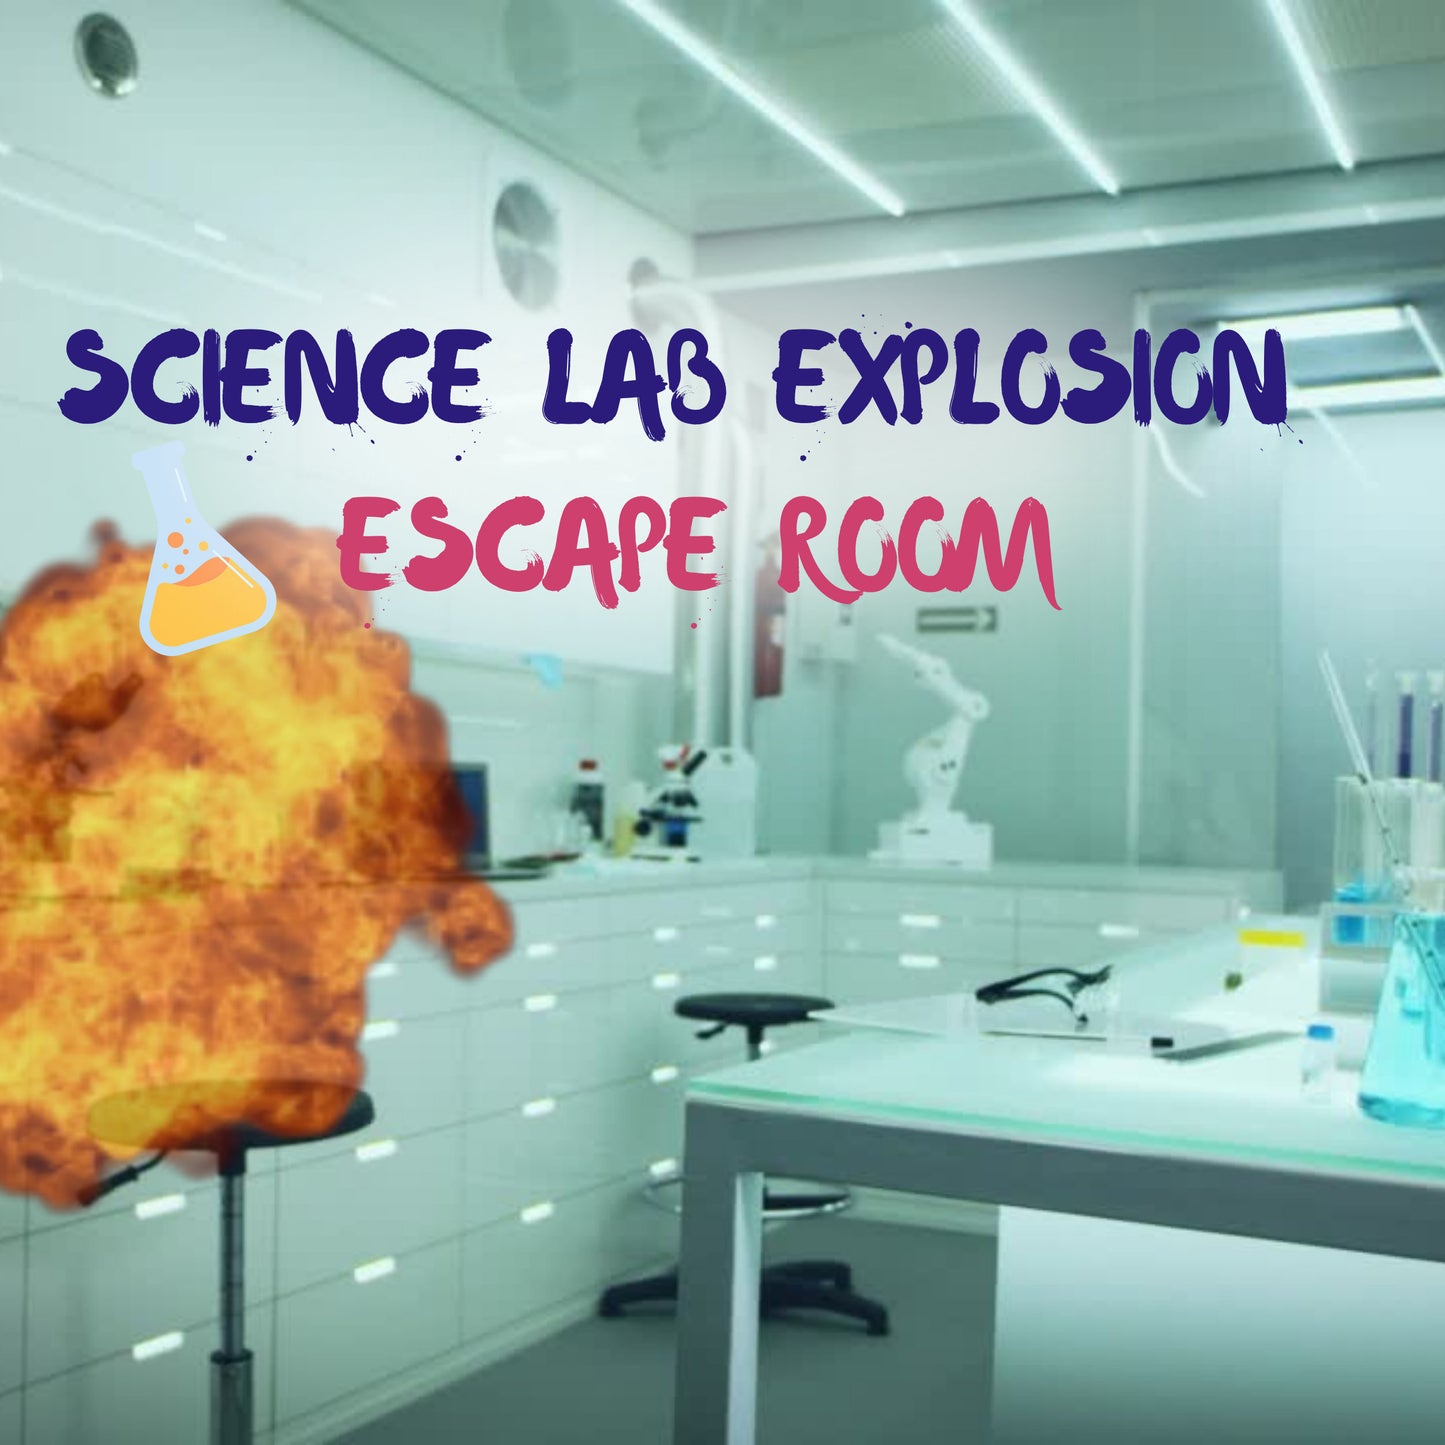 Science Lab Escape Room for Kids, Science Theme Party Game, DIY Escape Room, Escape Room for Kids, Family Game Night Print & Go, Party Game